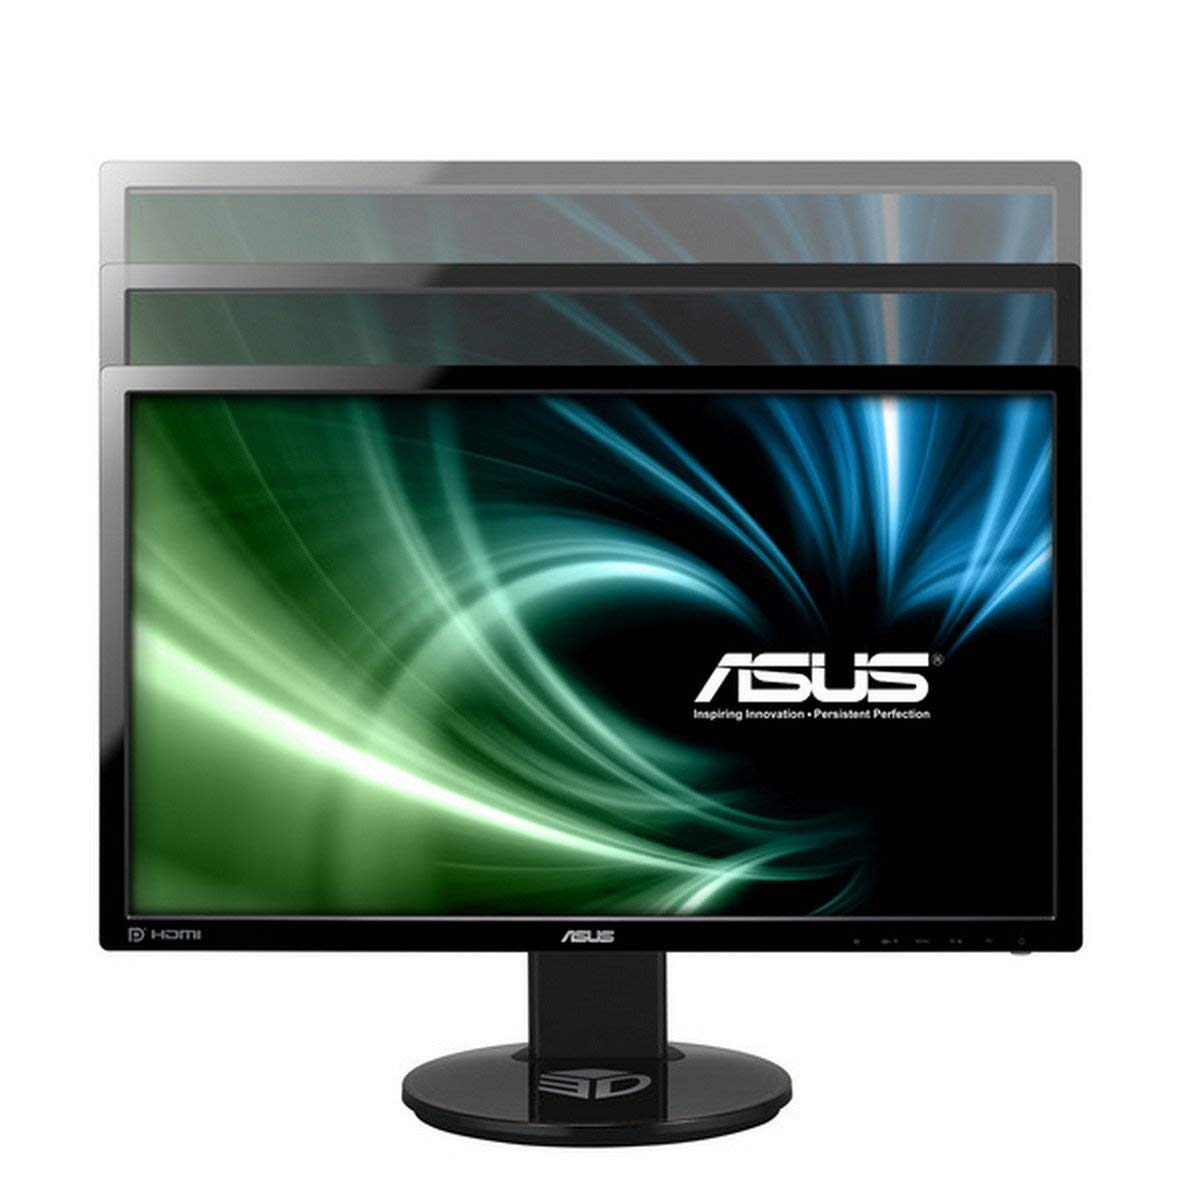 ASUS VG248QE introduction